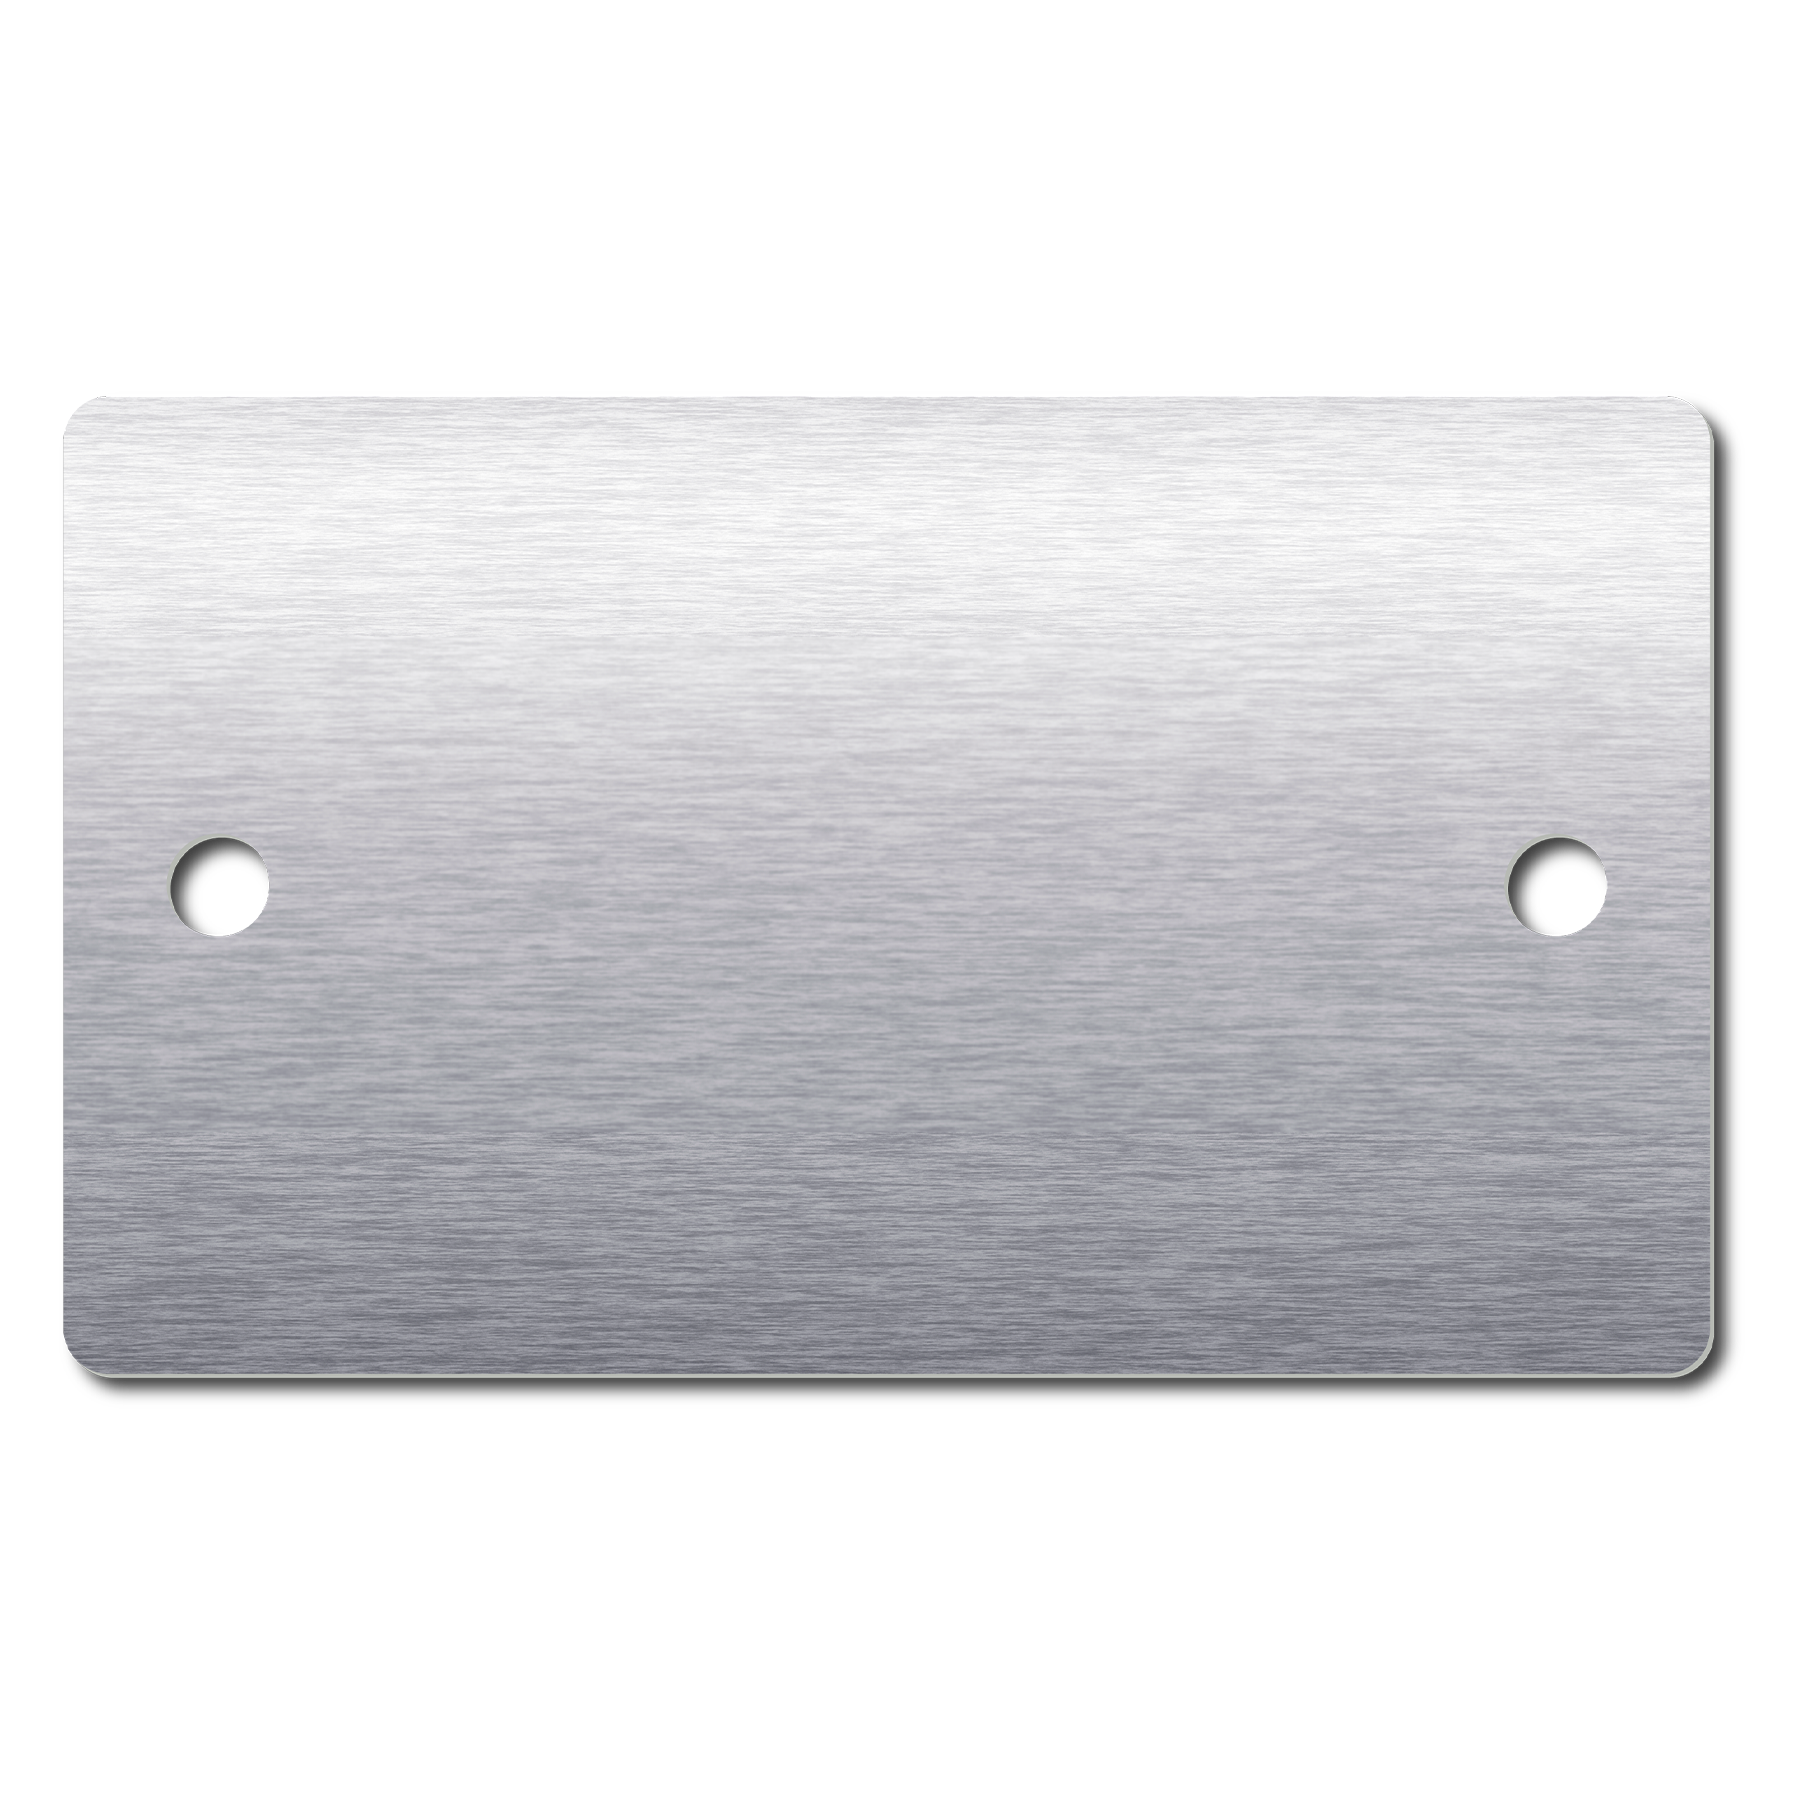 Anodized Aluminum Rectangle Tags, 1-3/16" x 2" with 1/8" Holes, Laser Engraved - Craftworks NW, LLC